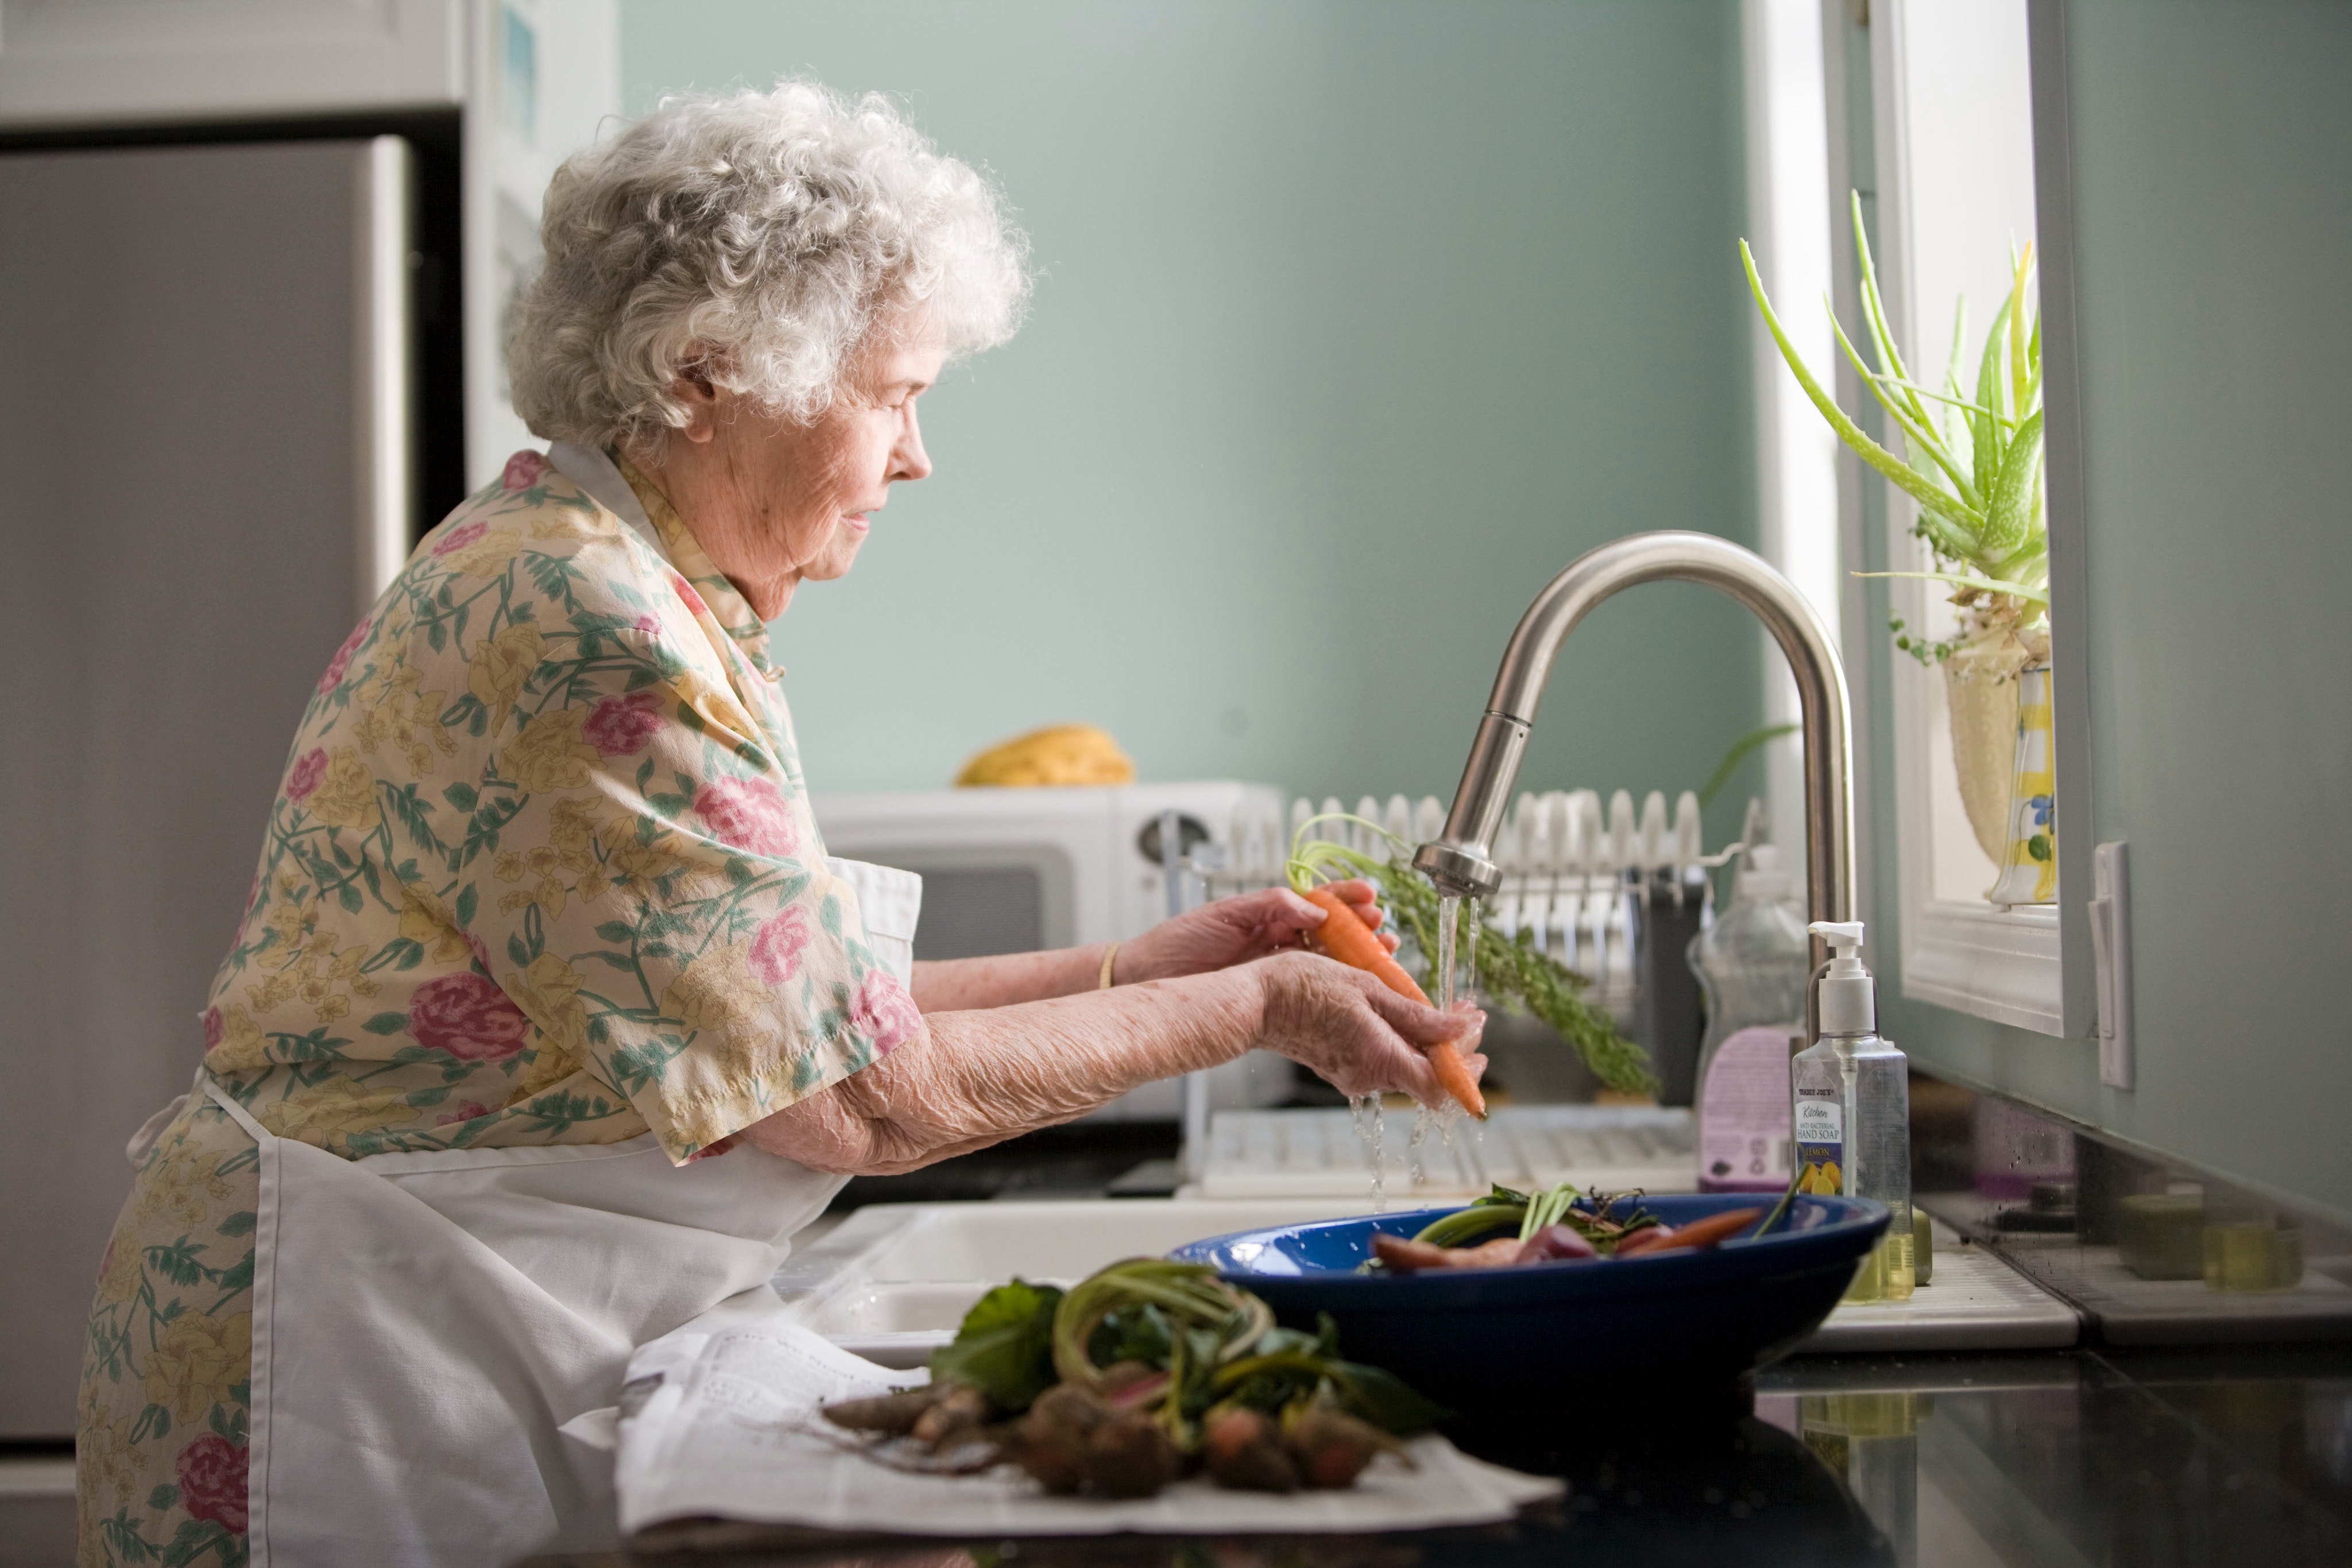 Environmental Cleaning In Aged Care